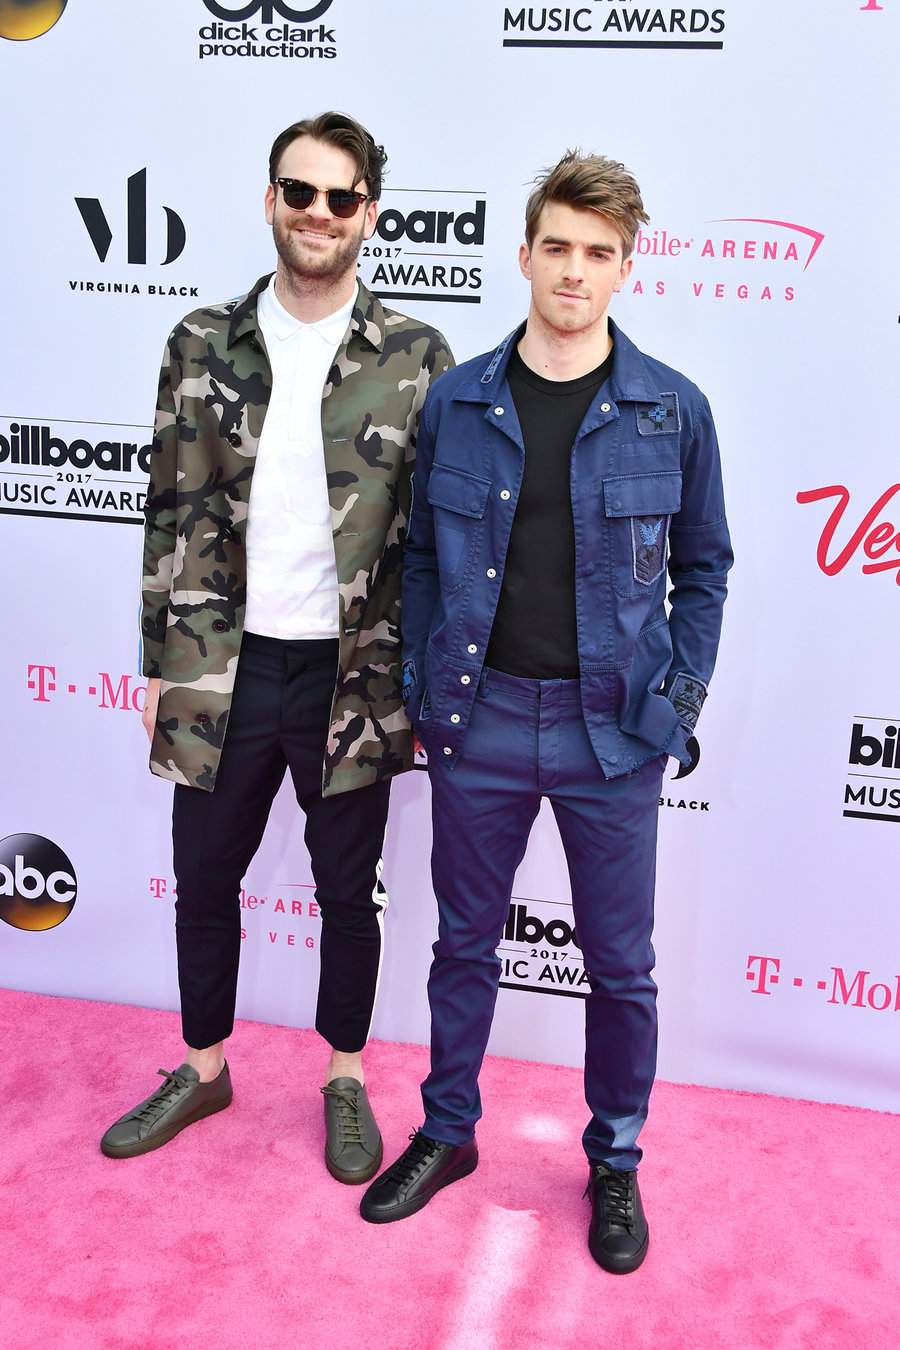 the-chainsmokers-bbmas-red-carpet-2017-a-billboard-1240.jpg